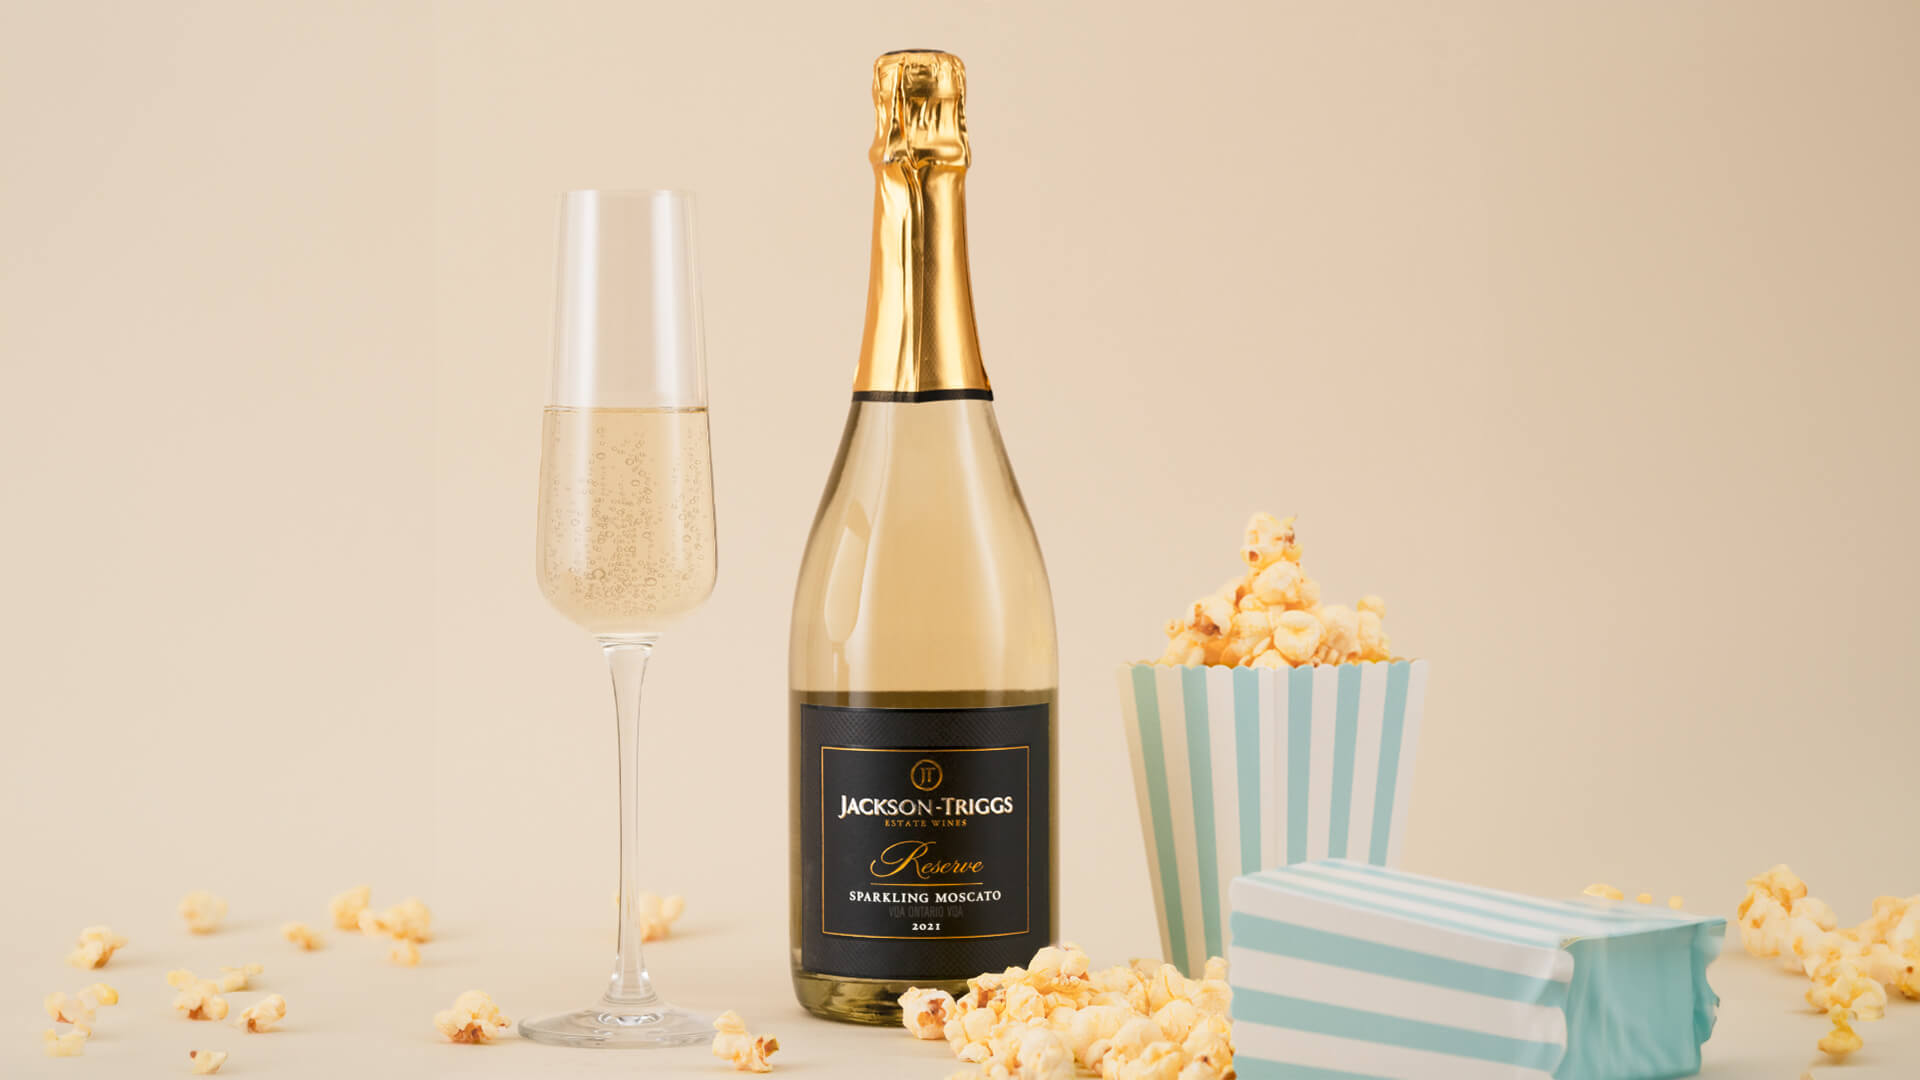 Jackson-Triggs Reserve Sparkling Moscato with a side of popcorn.